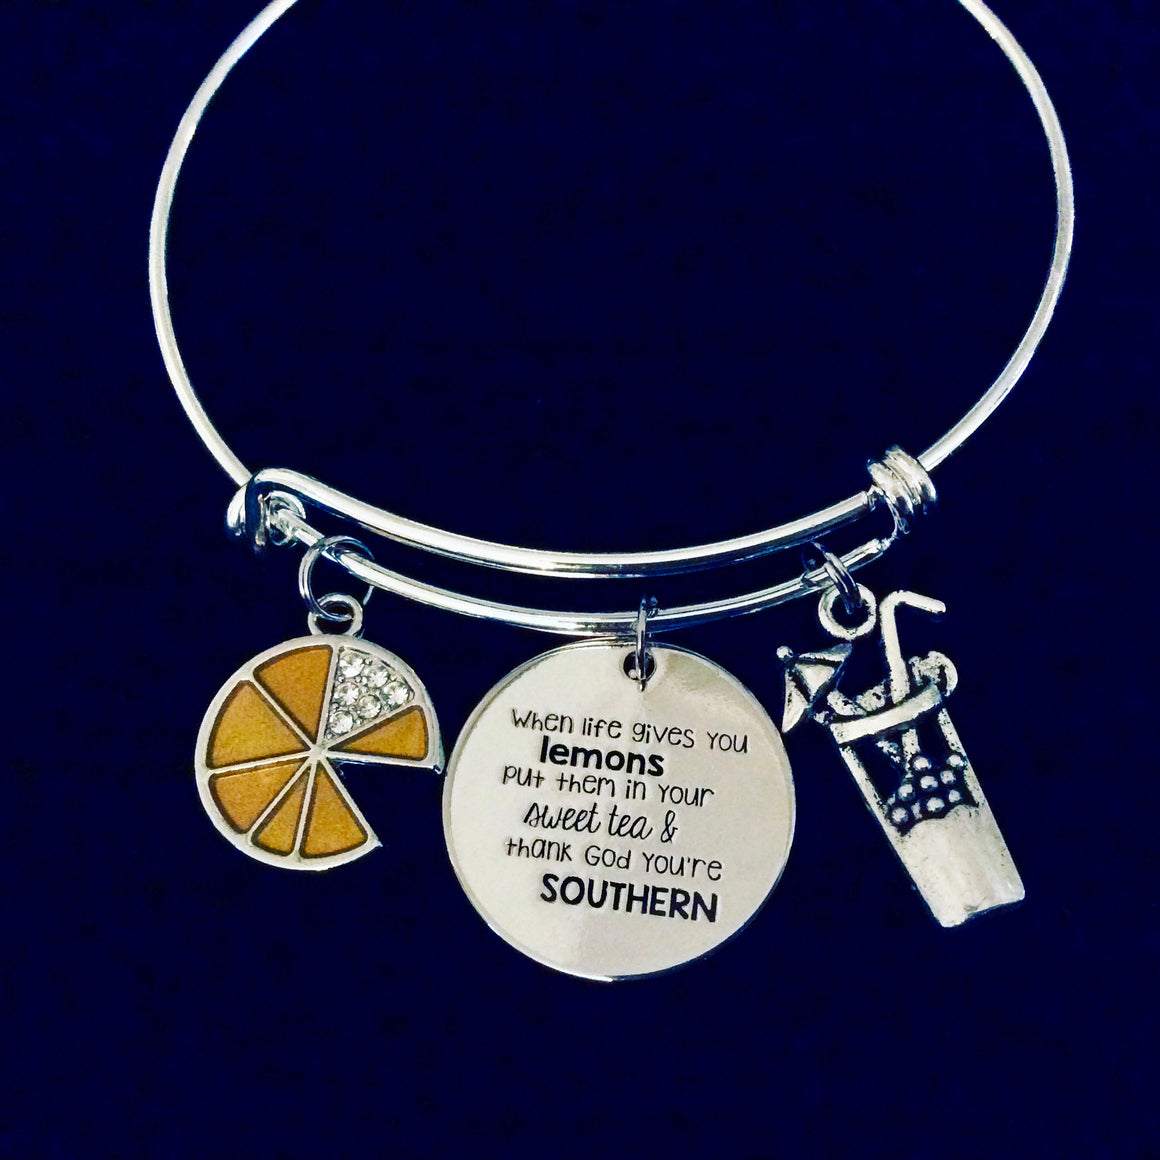 Southern Sweet Tea When Life Gives You Lemons Silver Expandable Charm Bracelet Adjustable Bangle One Size Fits All Gift